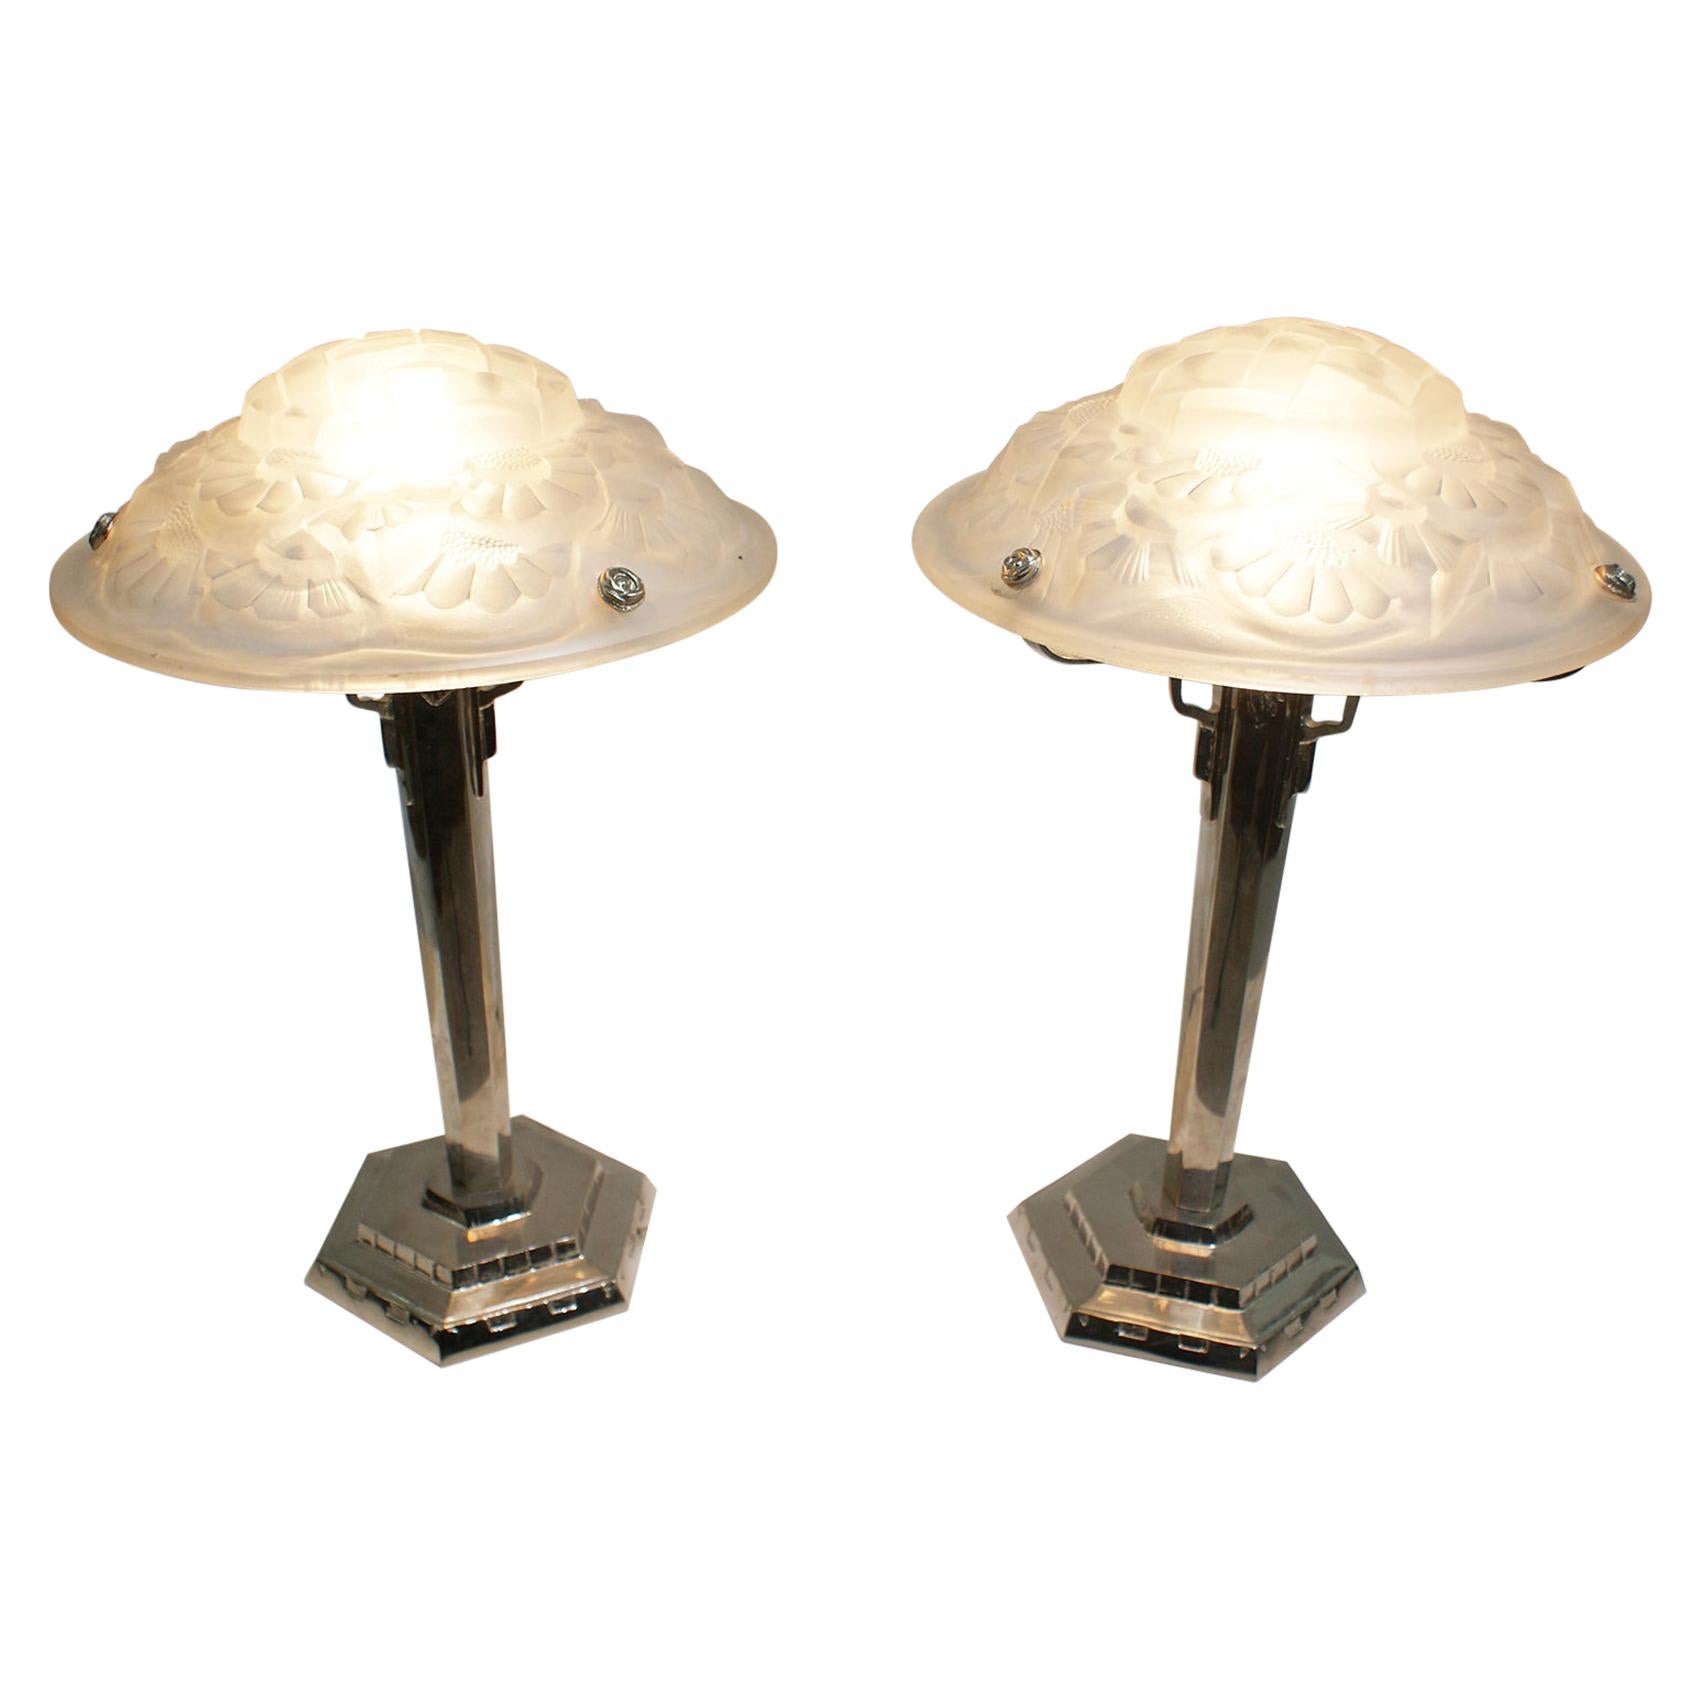 Pair of French Art Deco Table Lamp Signed “Degué” For Sale